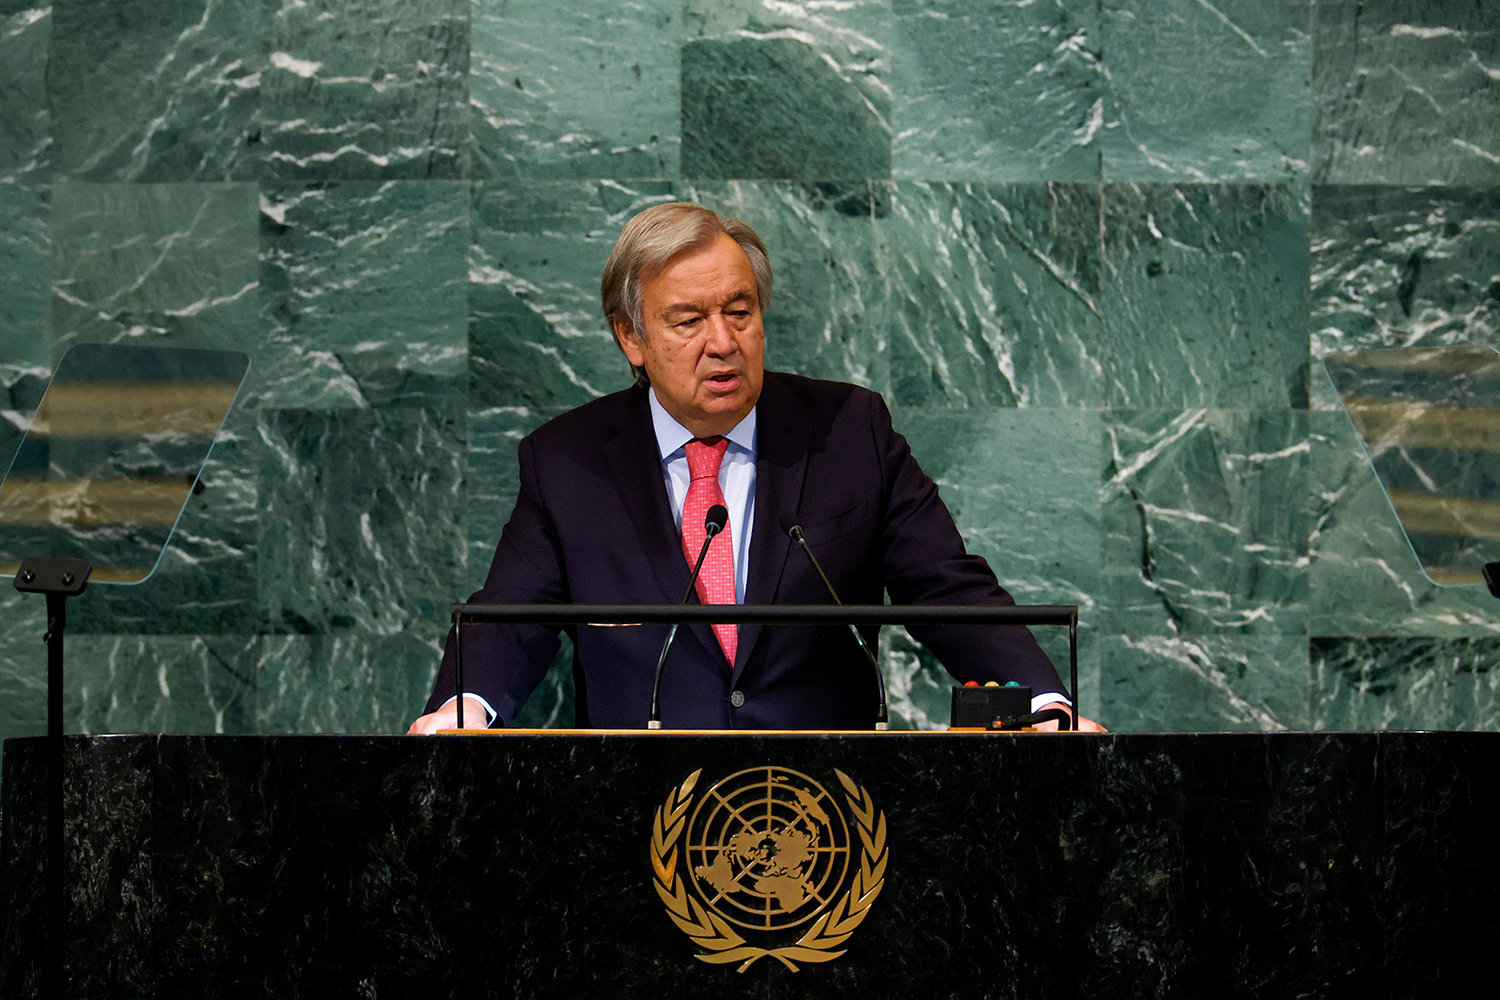 United Nations Secretary General Antonio Guterres speaks during the 77th session of the United Nations General Assembly (UNGA) at the U.N. headquarters on Sept. 20, 2022, in New York City. After two years of holding the session virtually or in a hybrid format, 157 heads of state and representatives of government are expected to attend the General Assembly in person. (Anna Moneymaker/Getty Images/TNS)